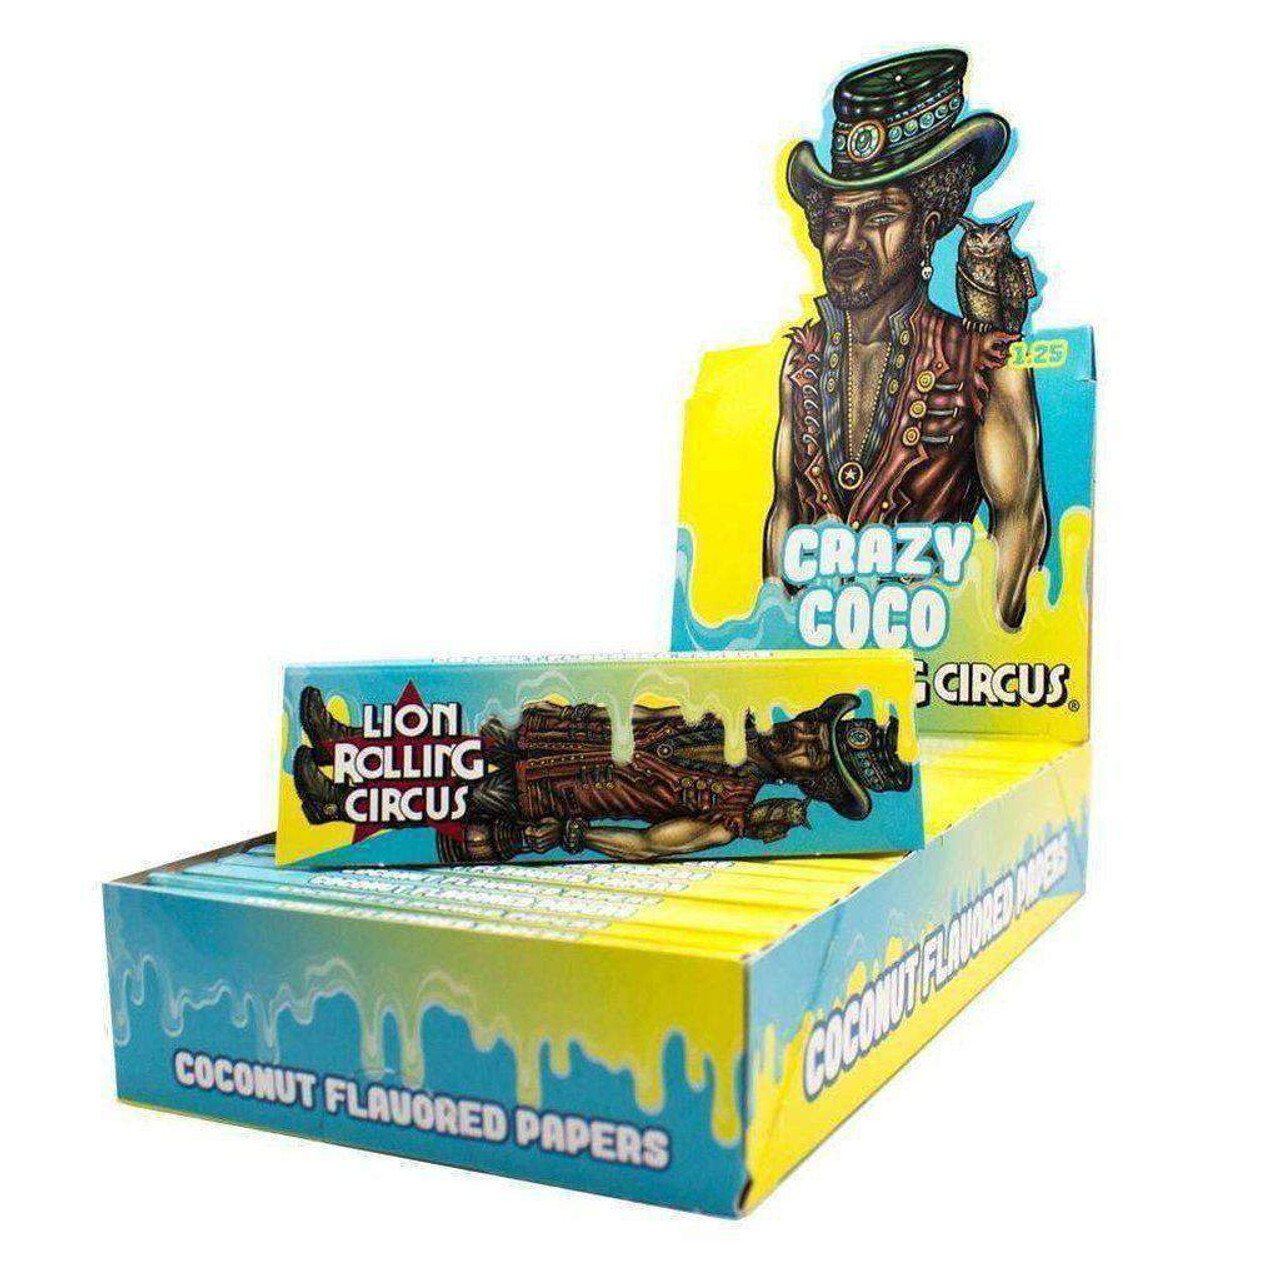 Lion Rolling Circus 1 1/4" Crazy Coco Flavored Rolling Papers